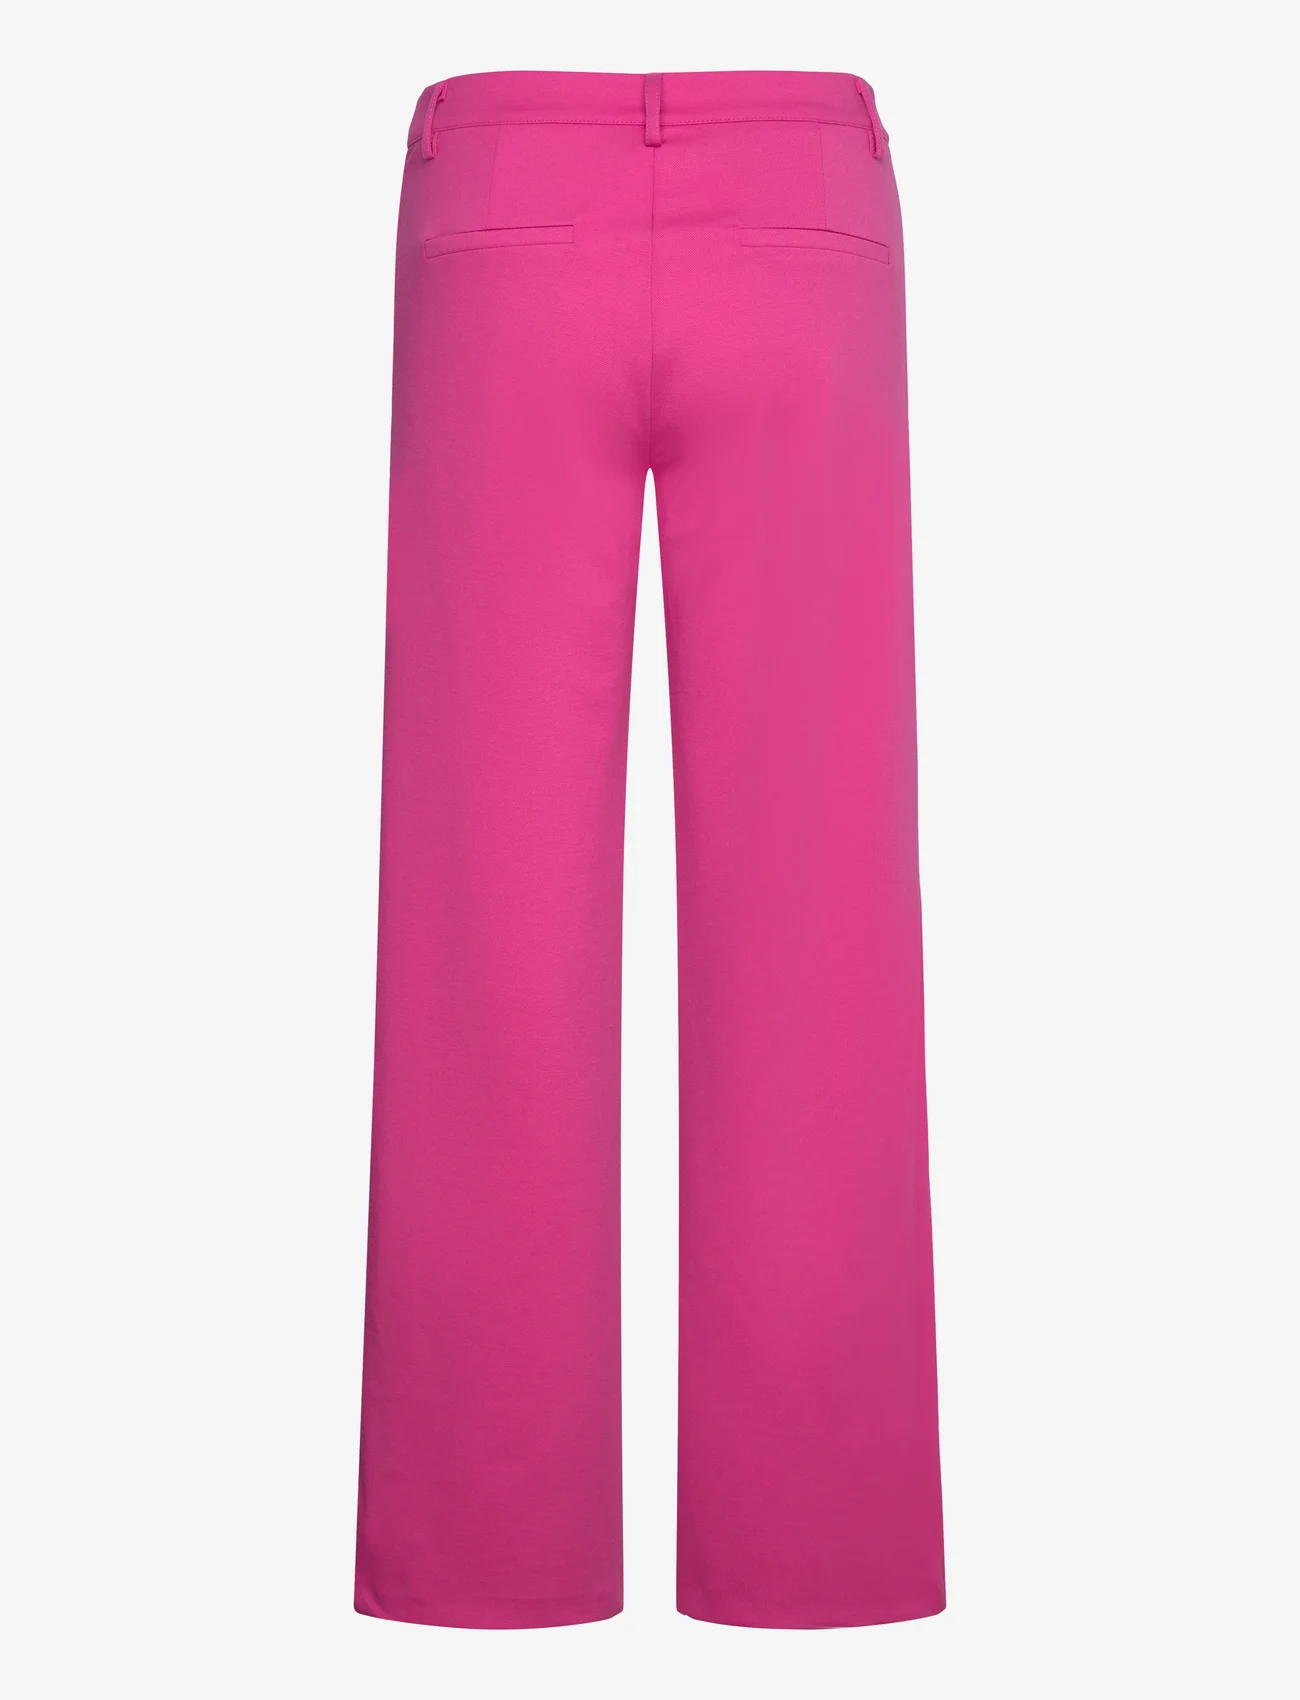 FREE/QUENT - FQNANNI-PANT - festmode zu outlet-preisen - raspberry rose - 1